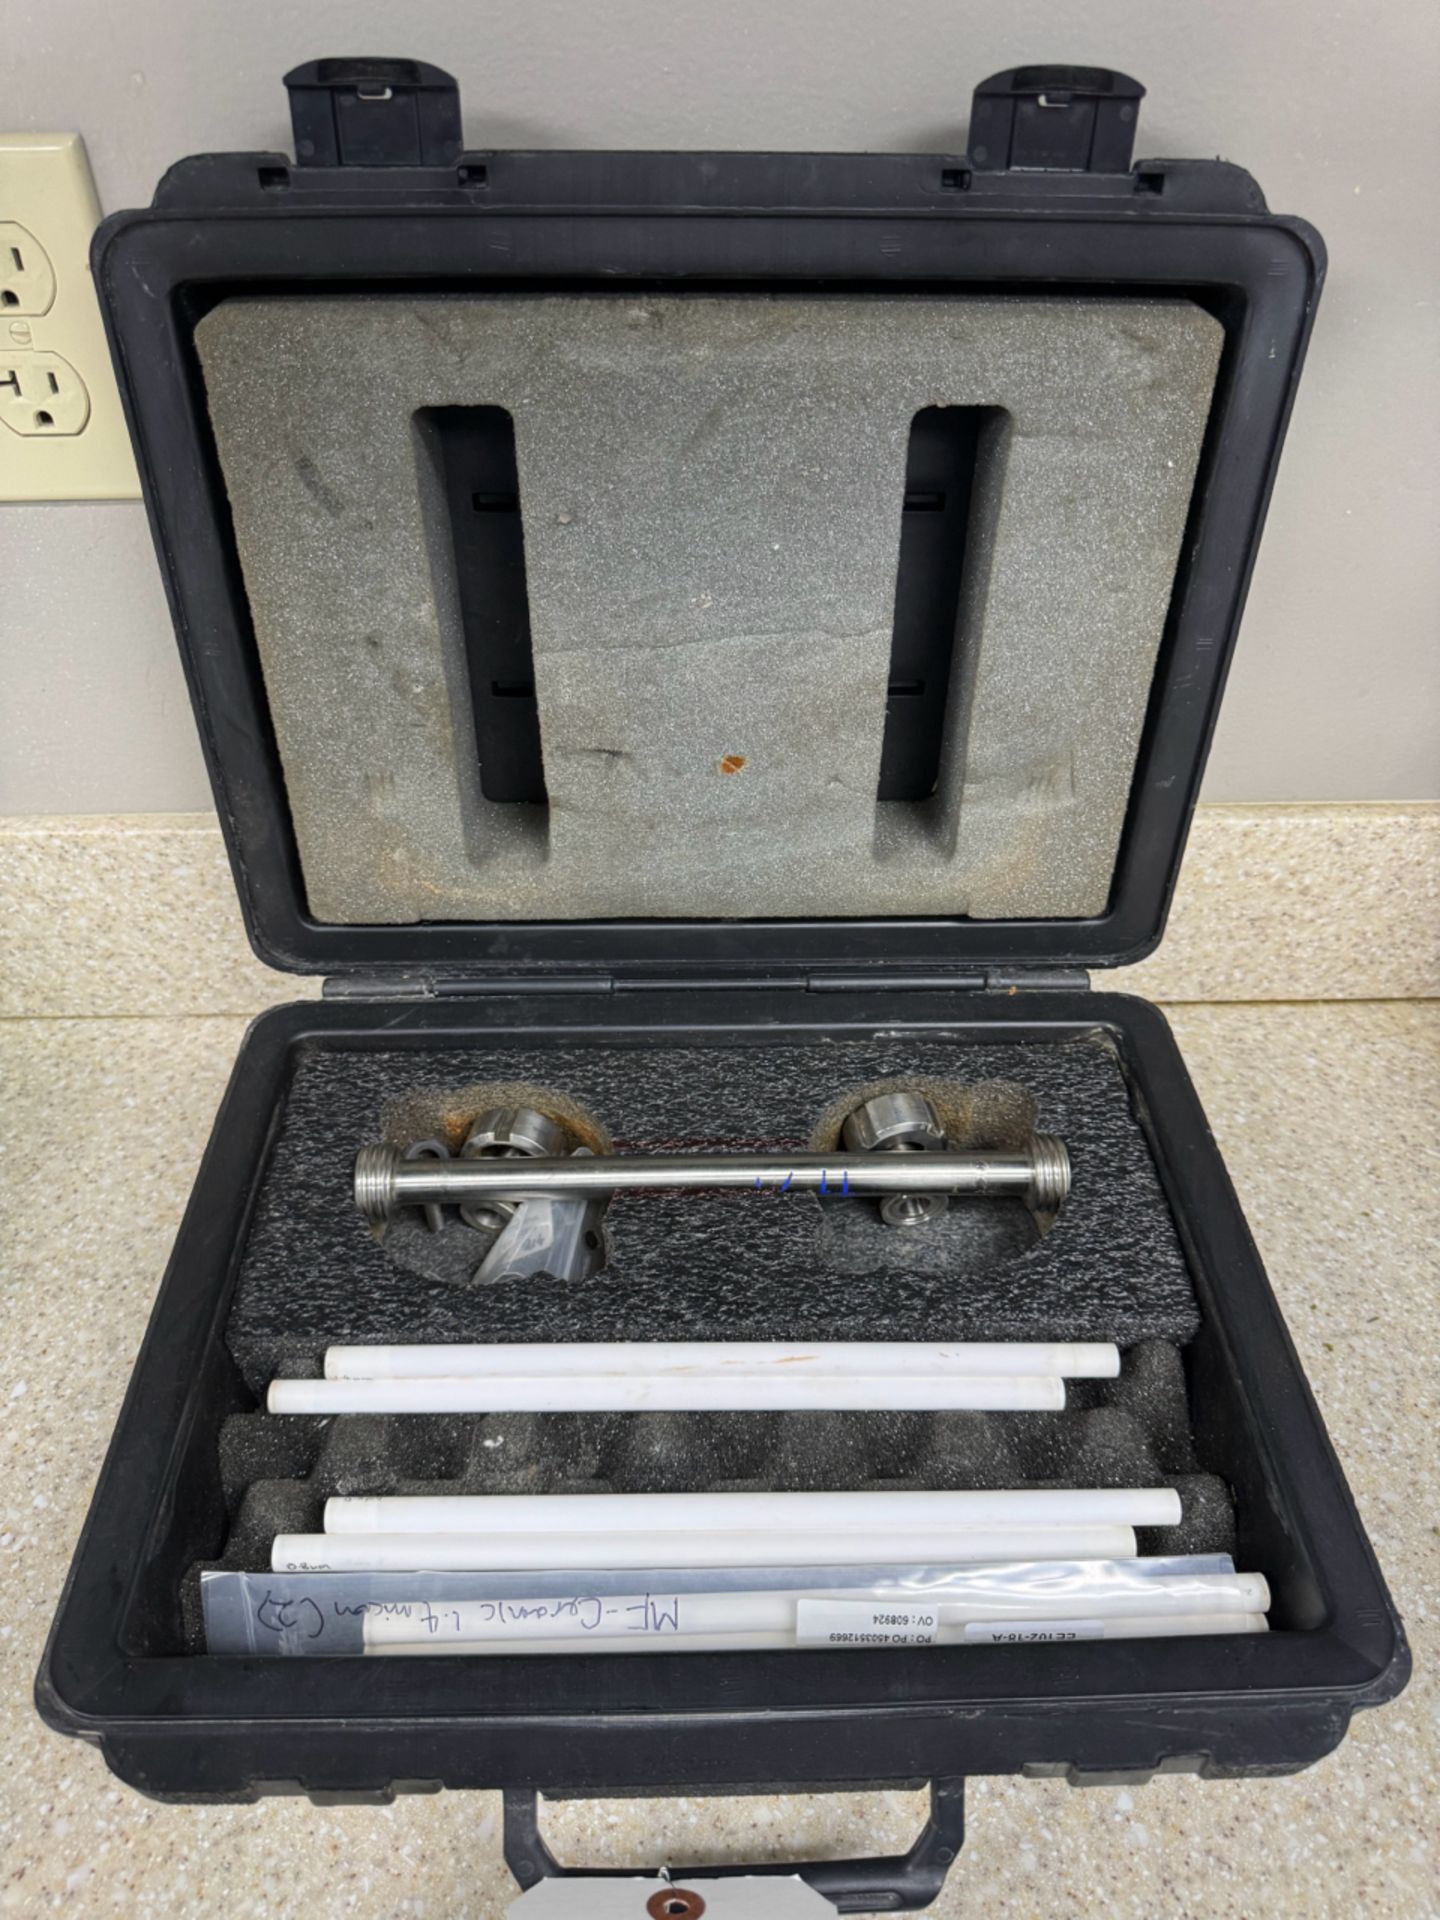 Lot Safeline Metal Detection & X-Ray Inspection Samples - Image 2 of 3